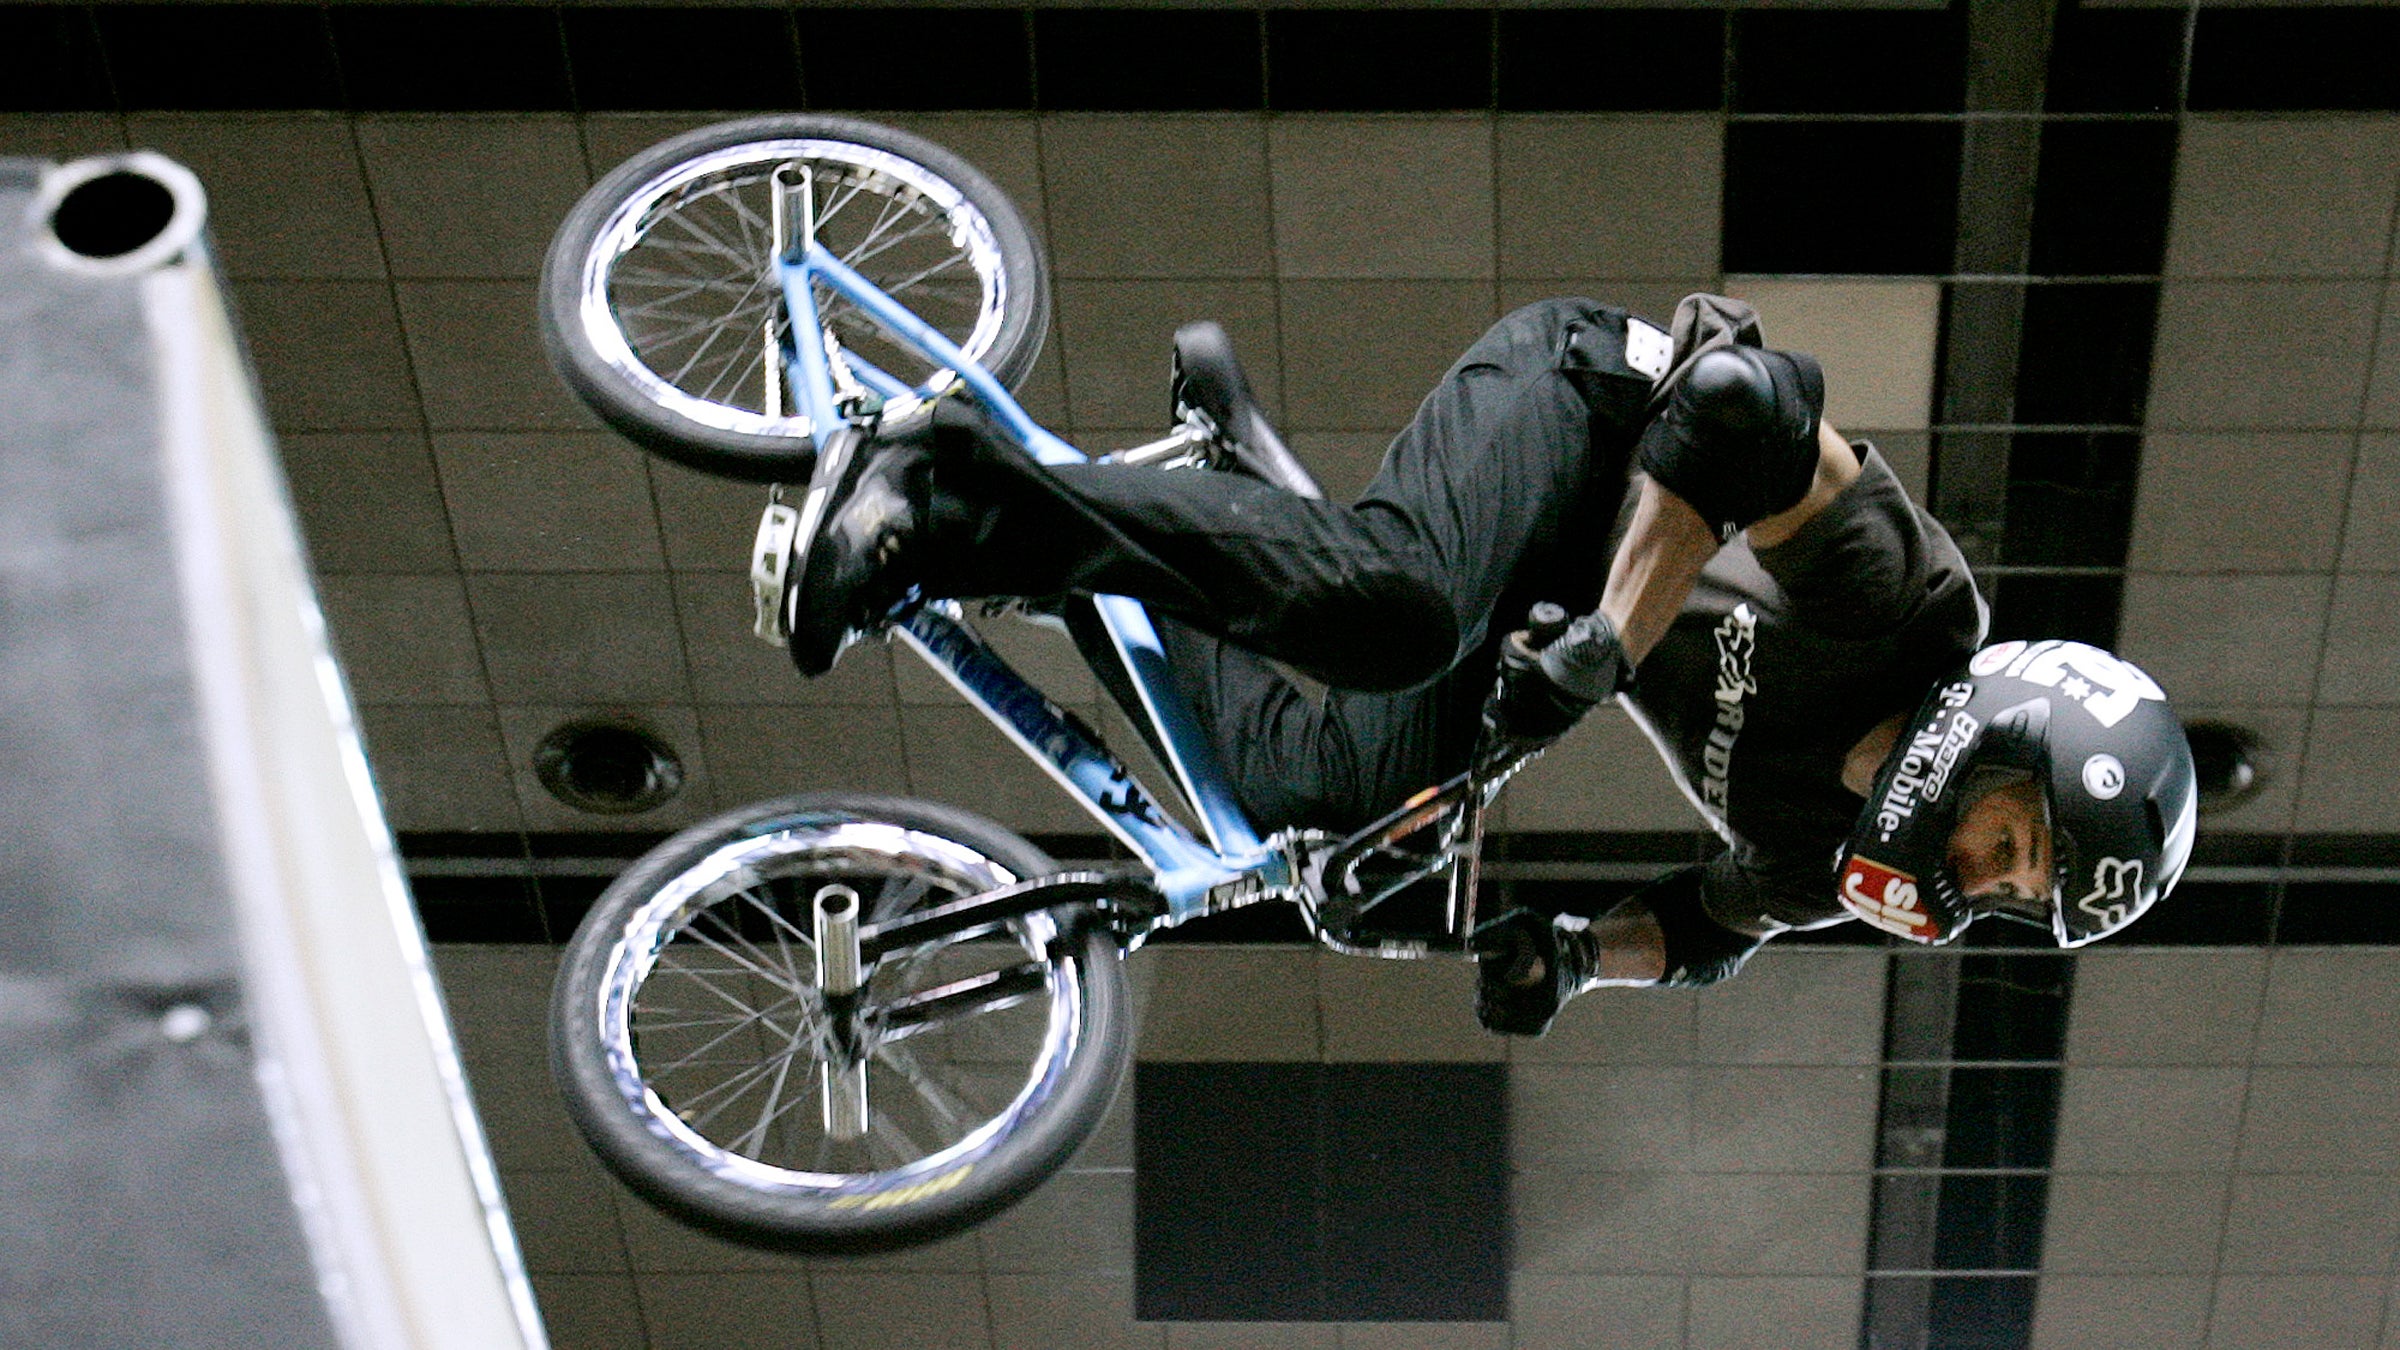 Dave Mirra practice in June 2005, about a year before what he described as his worst crash ever.